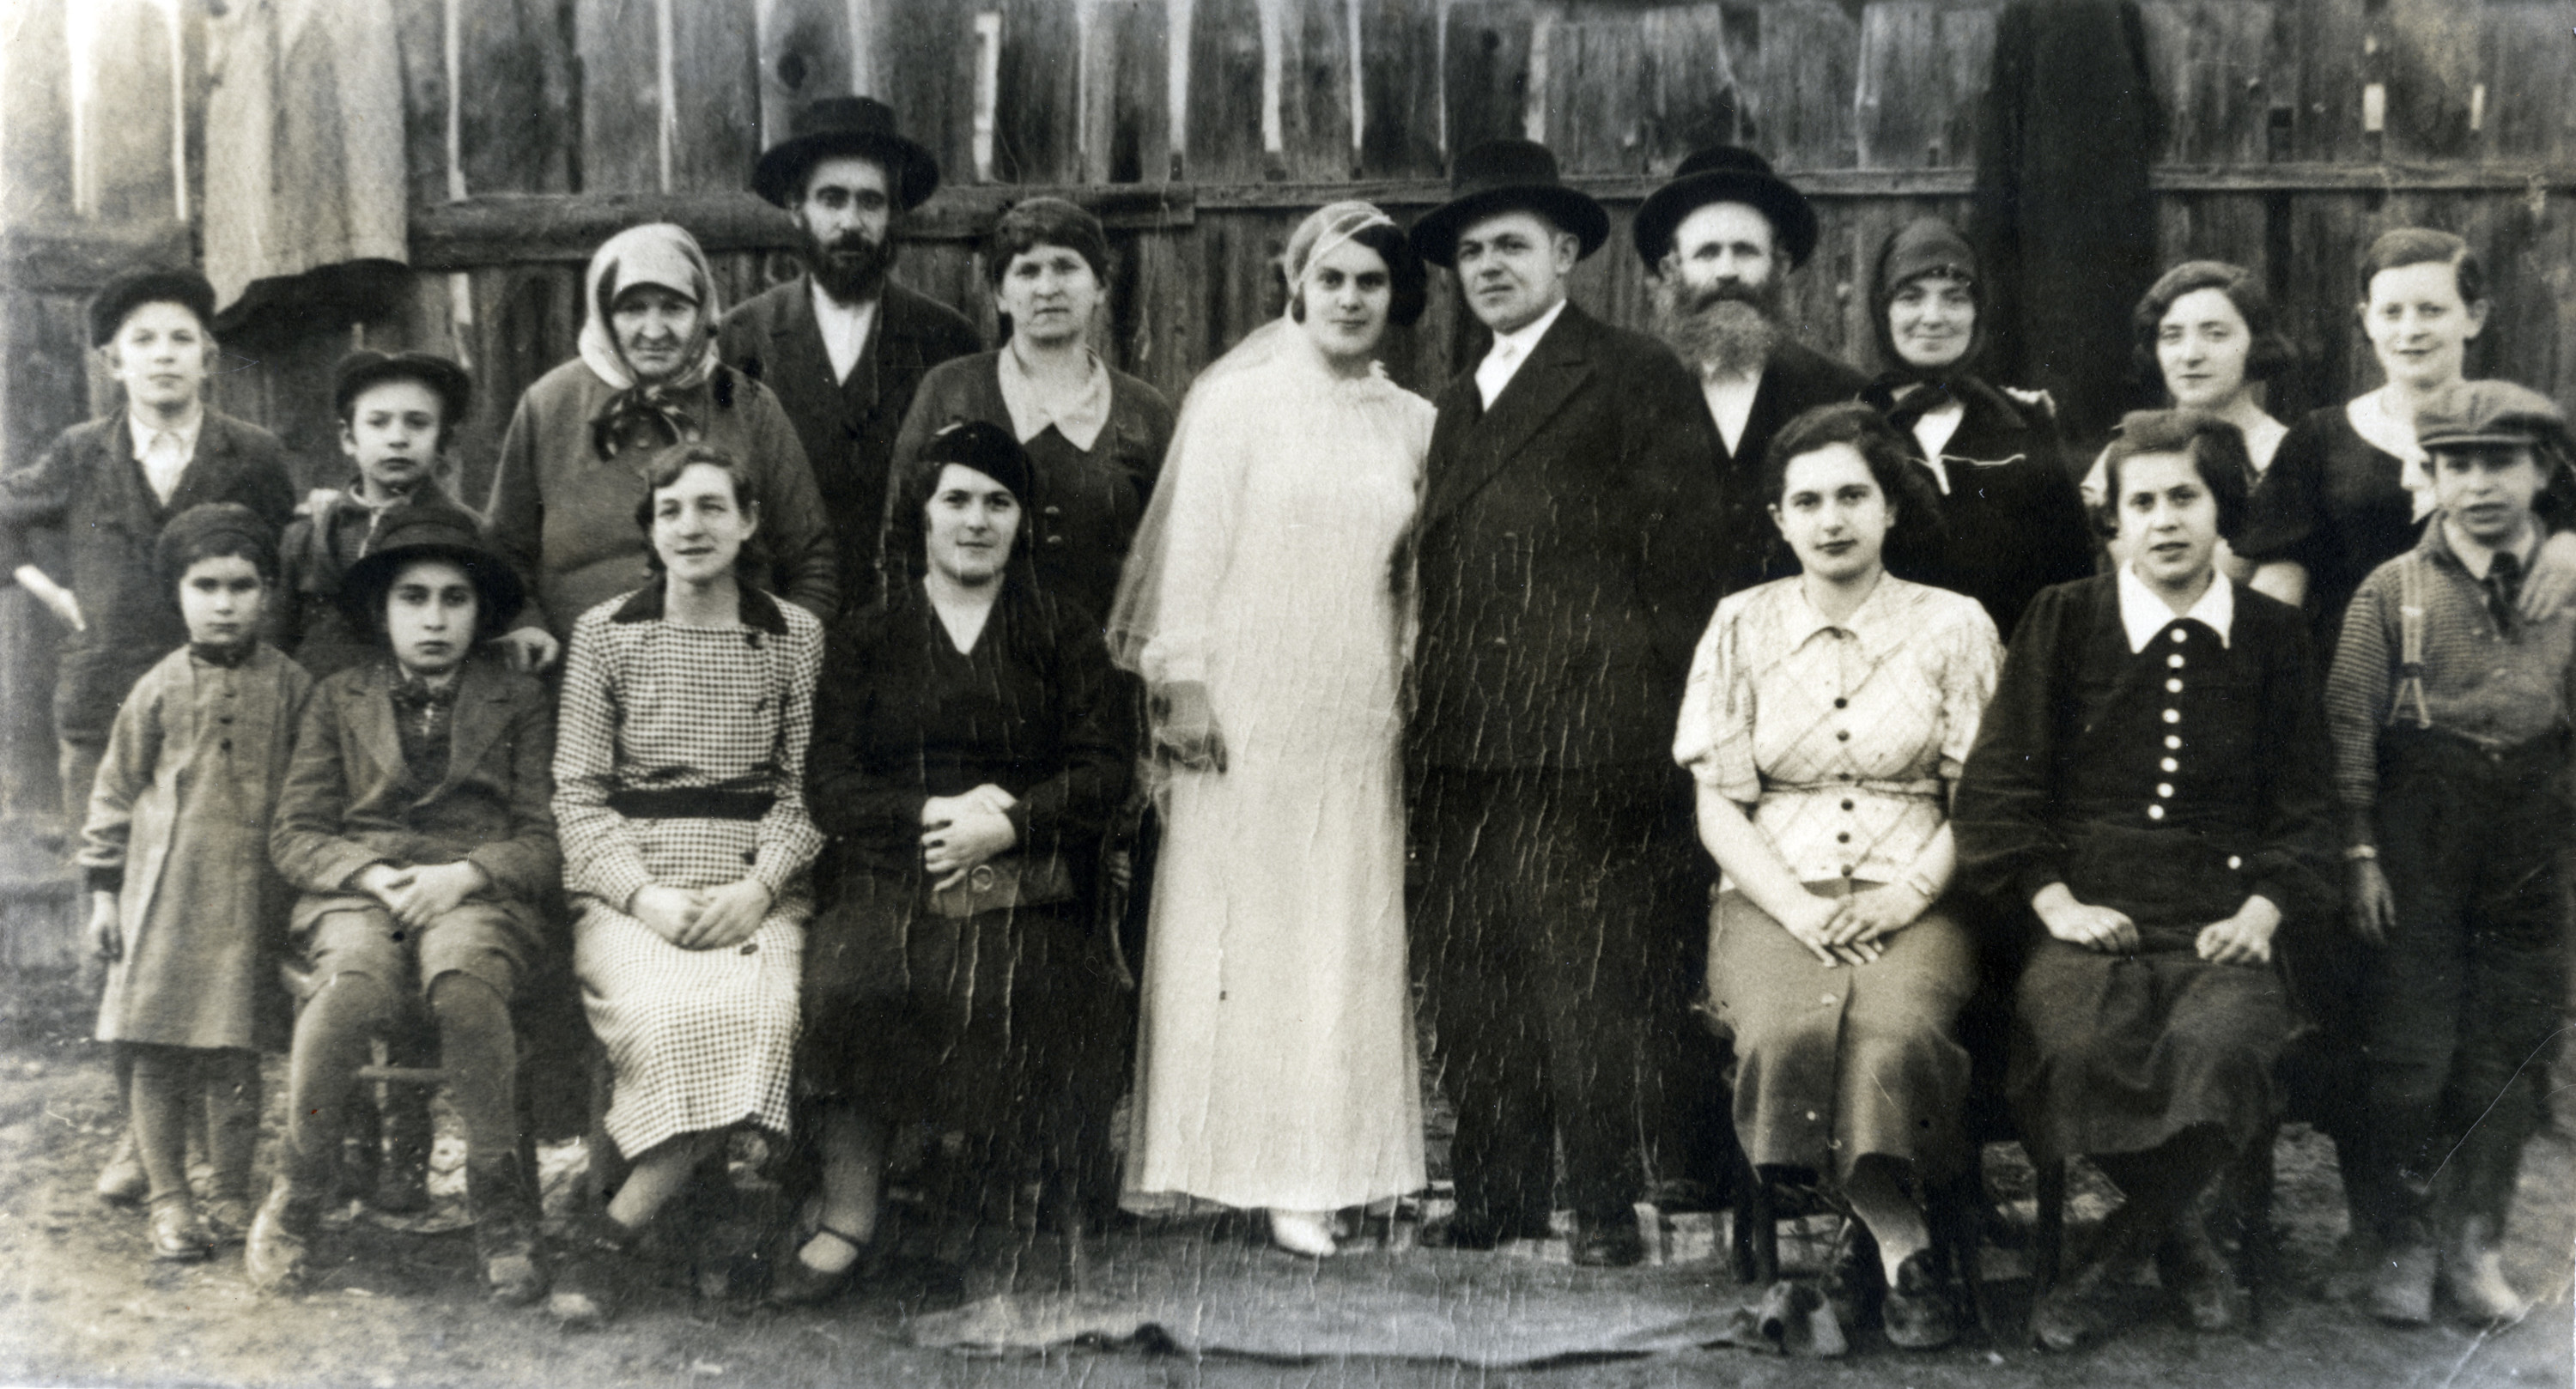 Group photograph of  wedding attendees in Solotvino, Czechslovakia.

Among those pictured are Israel Menachem Perl  and his wife Rachel Golda Perl (back row, fourth and fifth from the left), and their children Nahum (back row, far left), Chana (front row, far left), David (front row, second from the left), Rivka (front row, second from the right), and Alexander, (front row, far right).  The names of the bride and groom are not known.